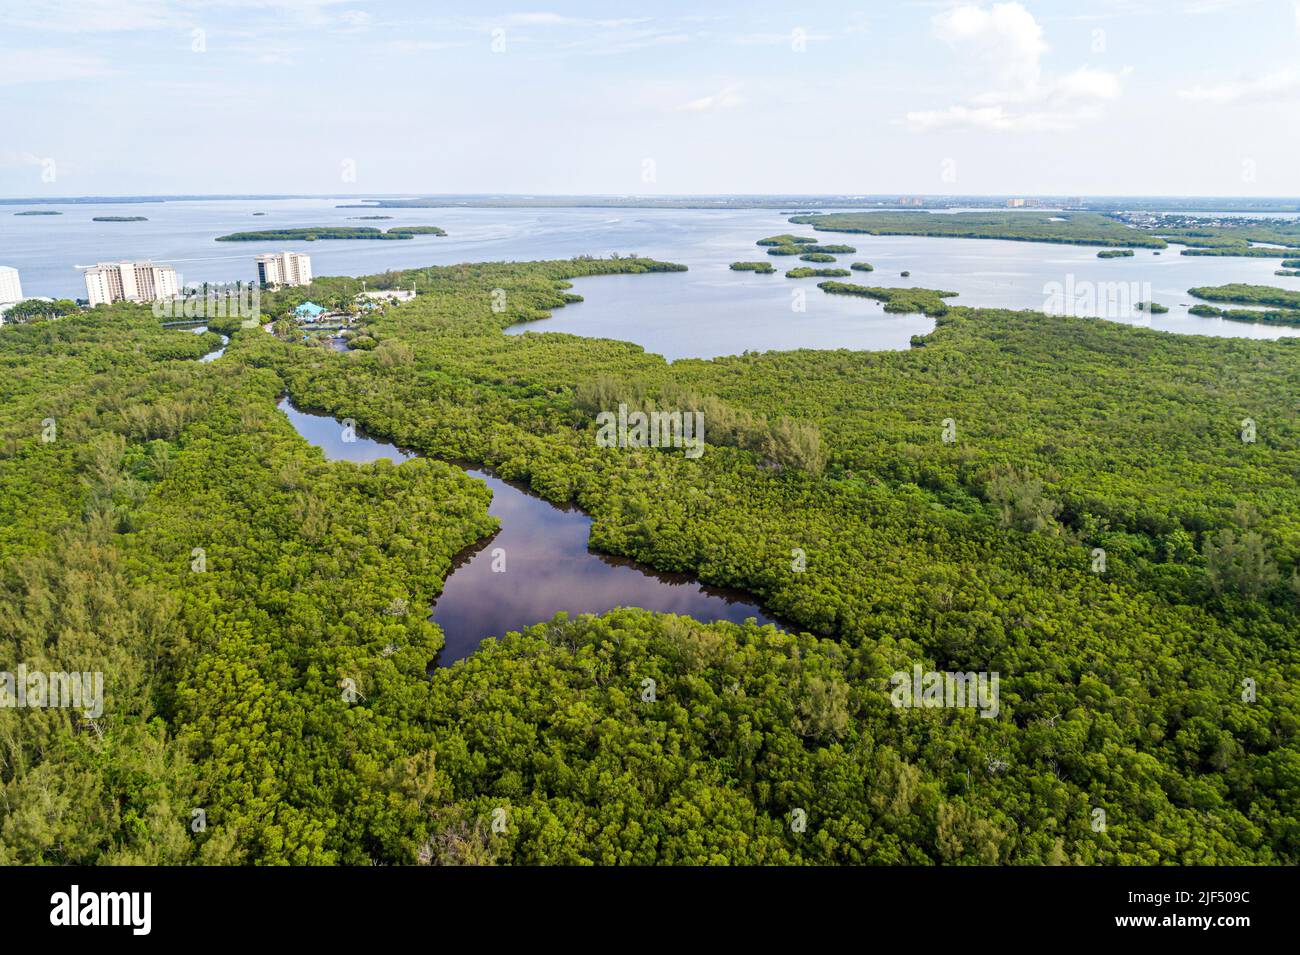 Fort Ft. Myers Florida,wetlands Punta Rassa Cove Gulf of Mexico Caloosahatchee River,aerial overhead view from above,natural scenery Stock Photo